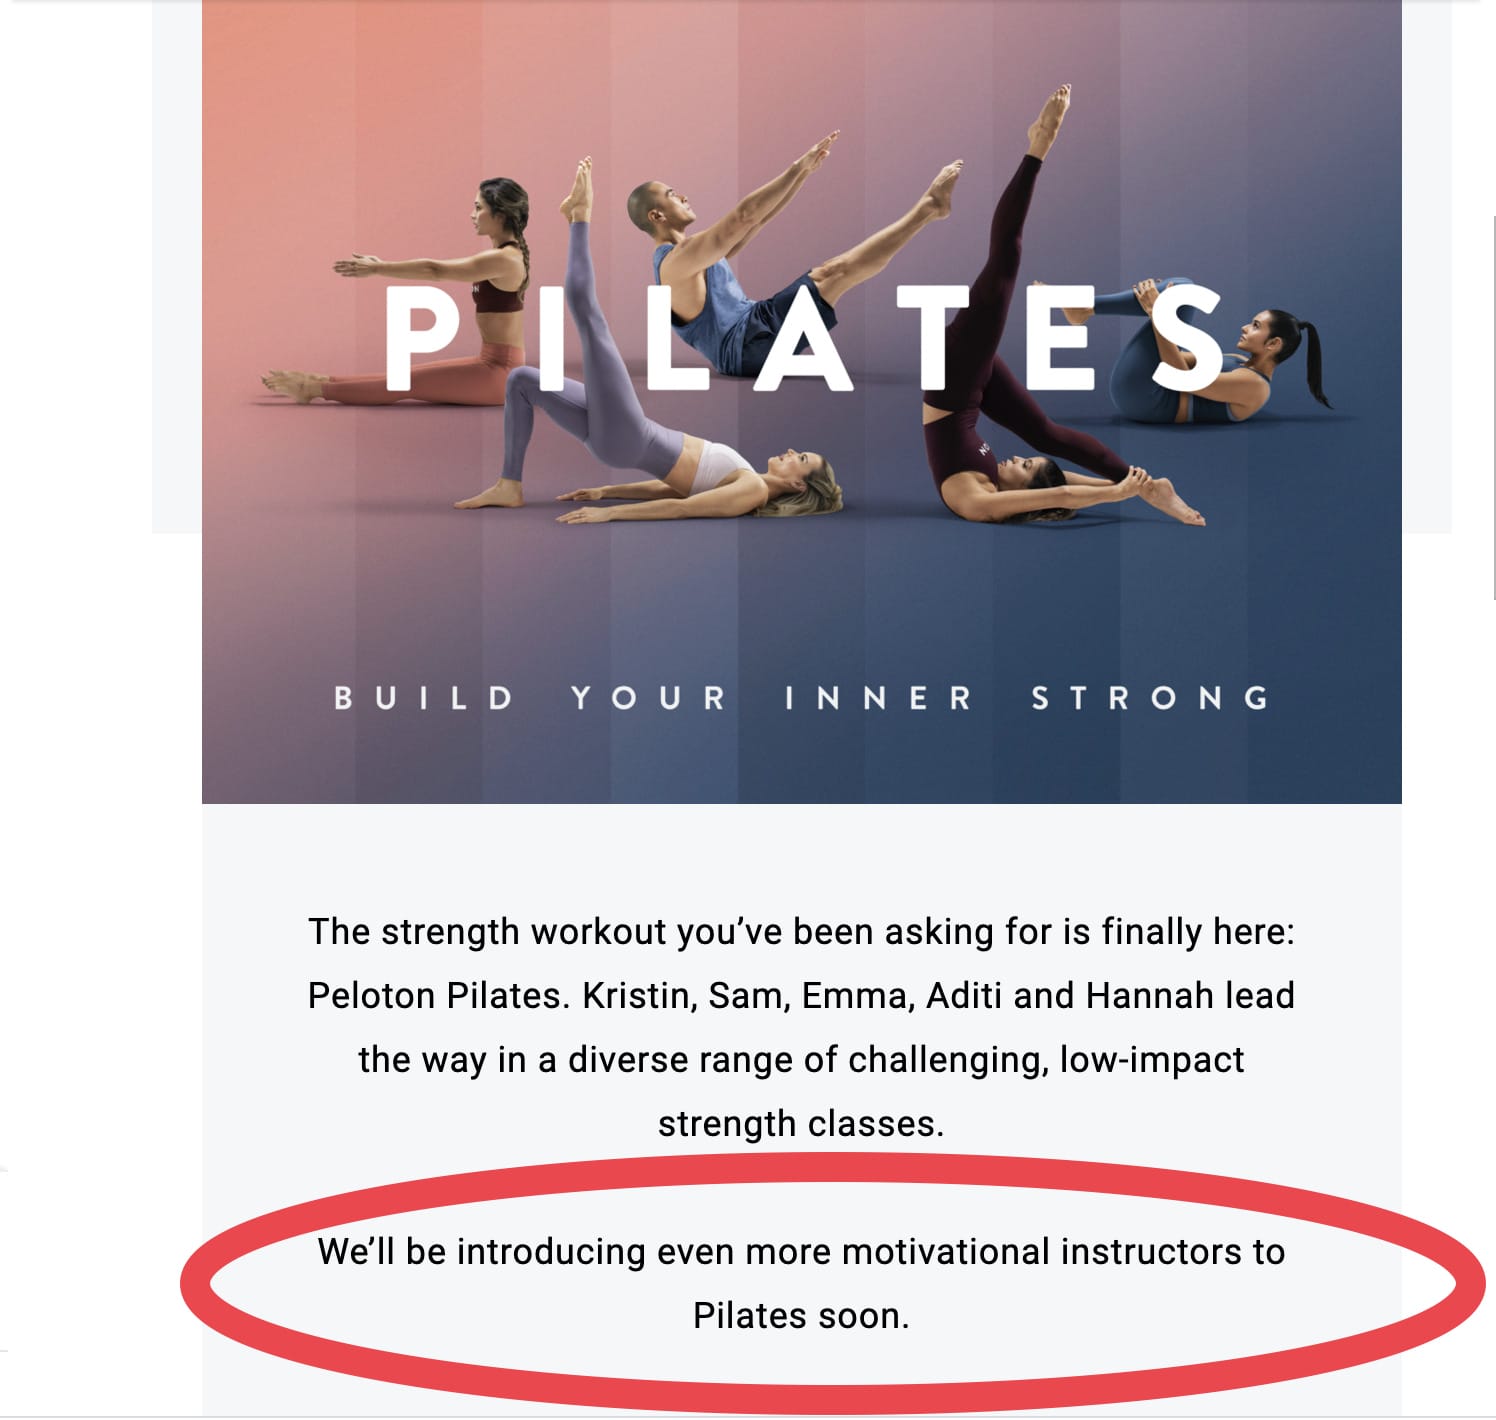 Peloton teasing new instructors for Pilates & other